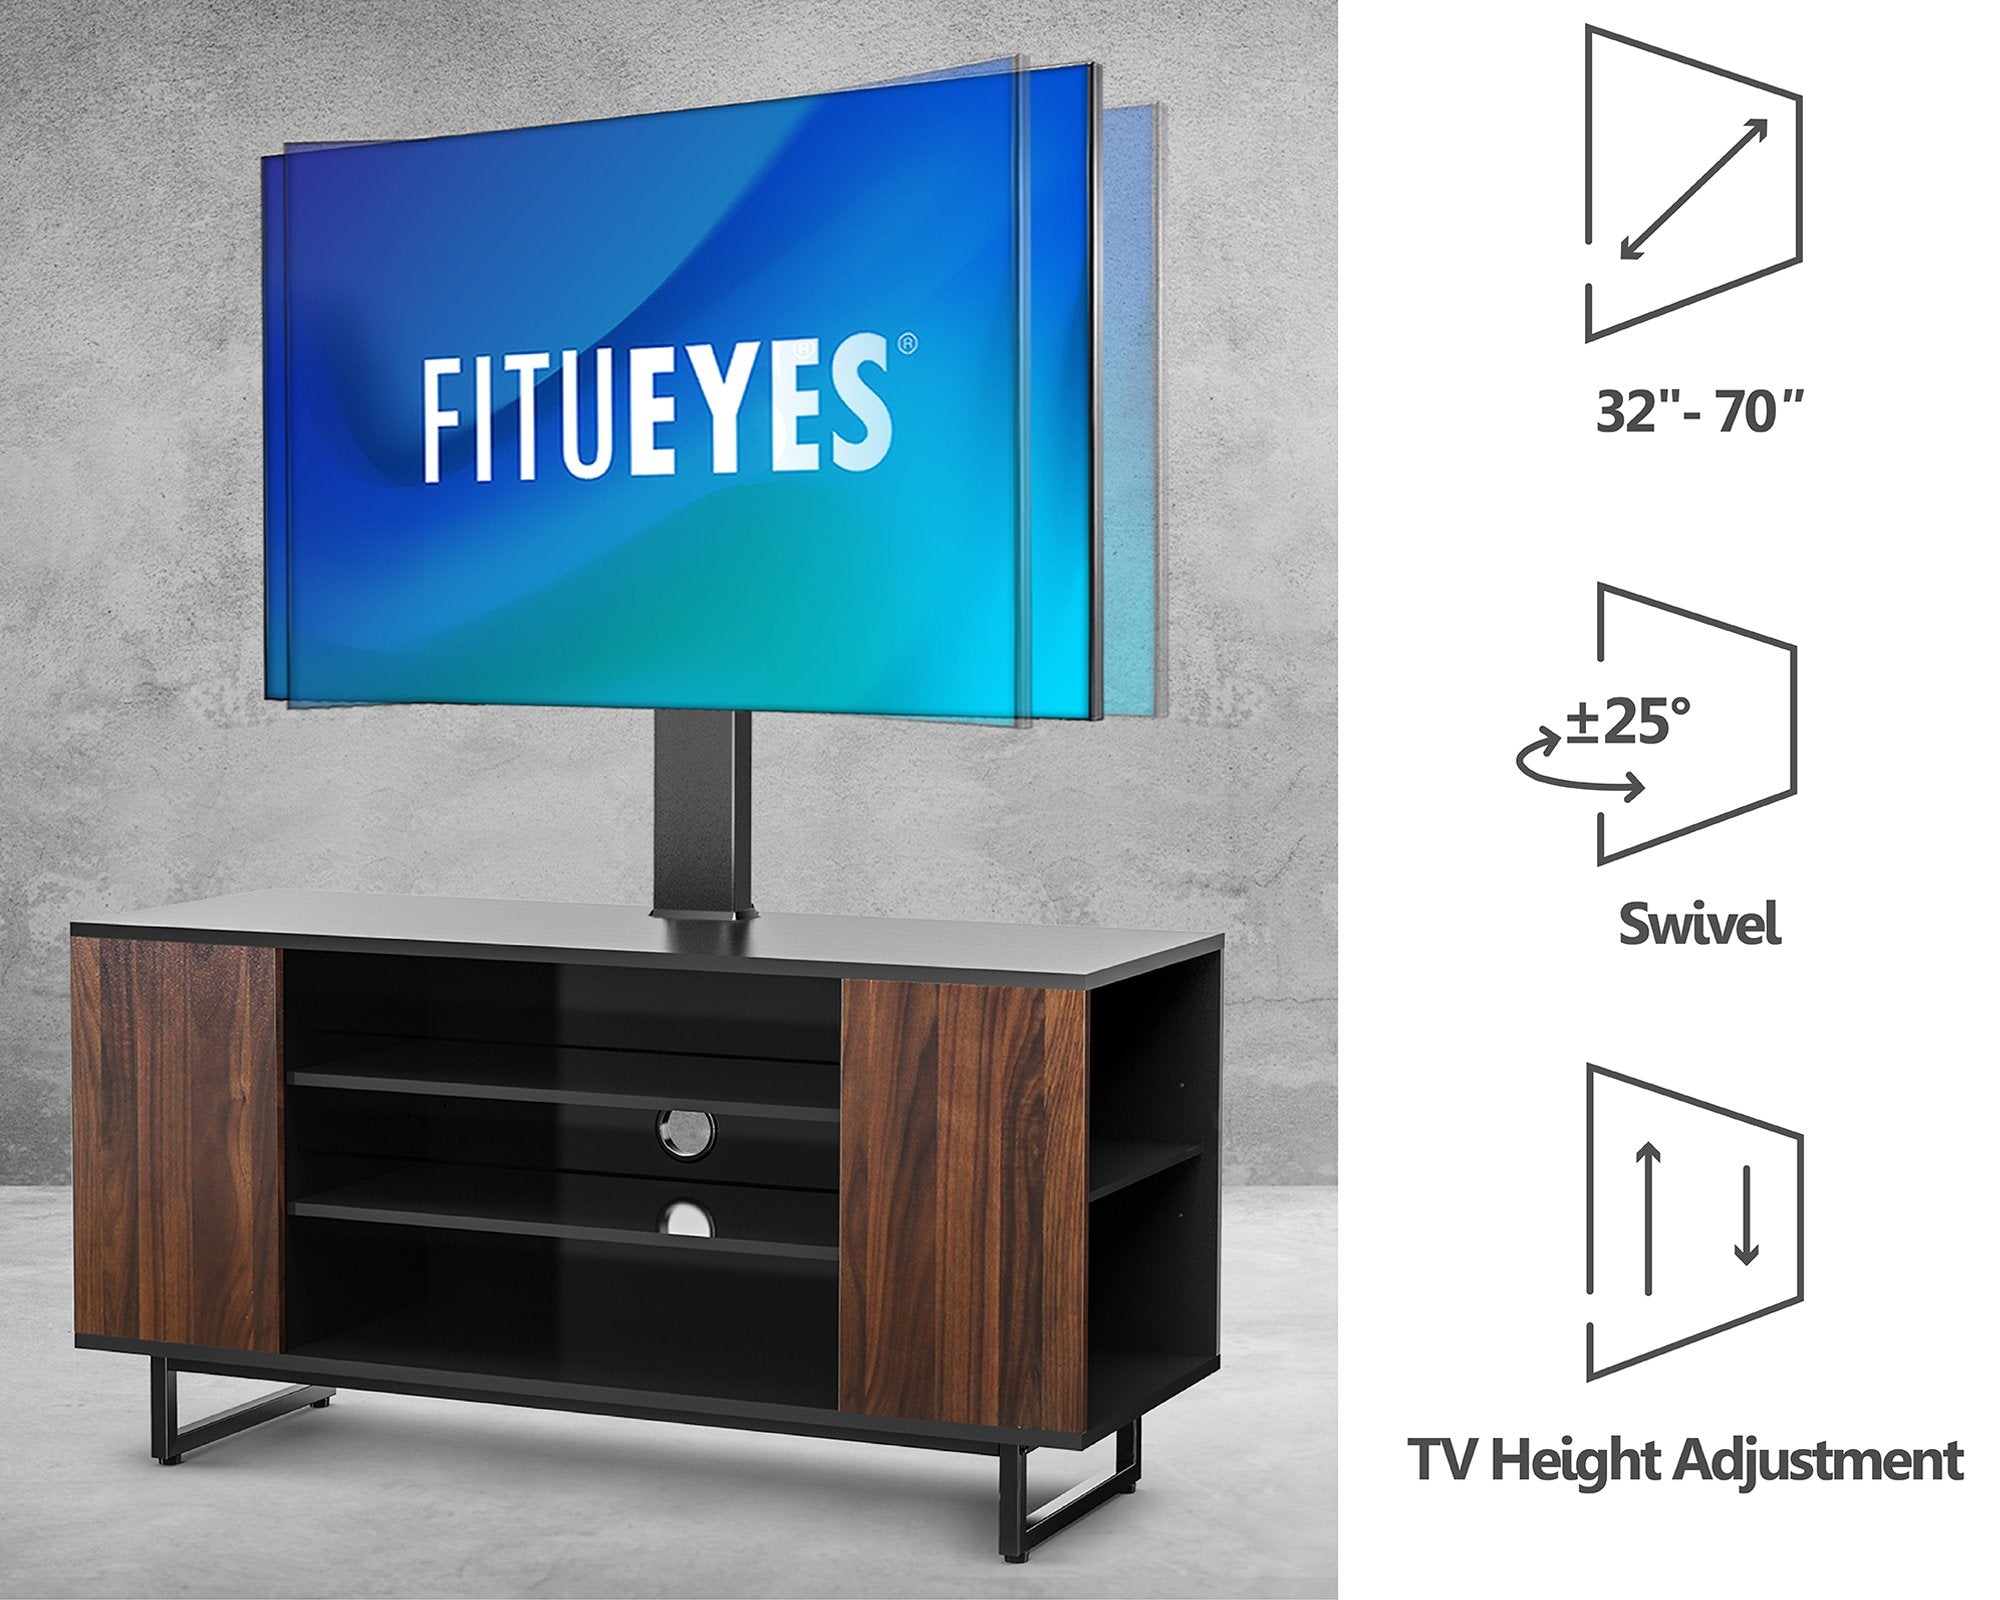 Floor Swivel TV Stand with Mount W Series 32-70 Inch - FITUEYES-CA